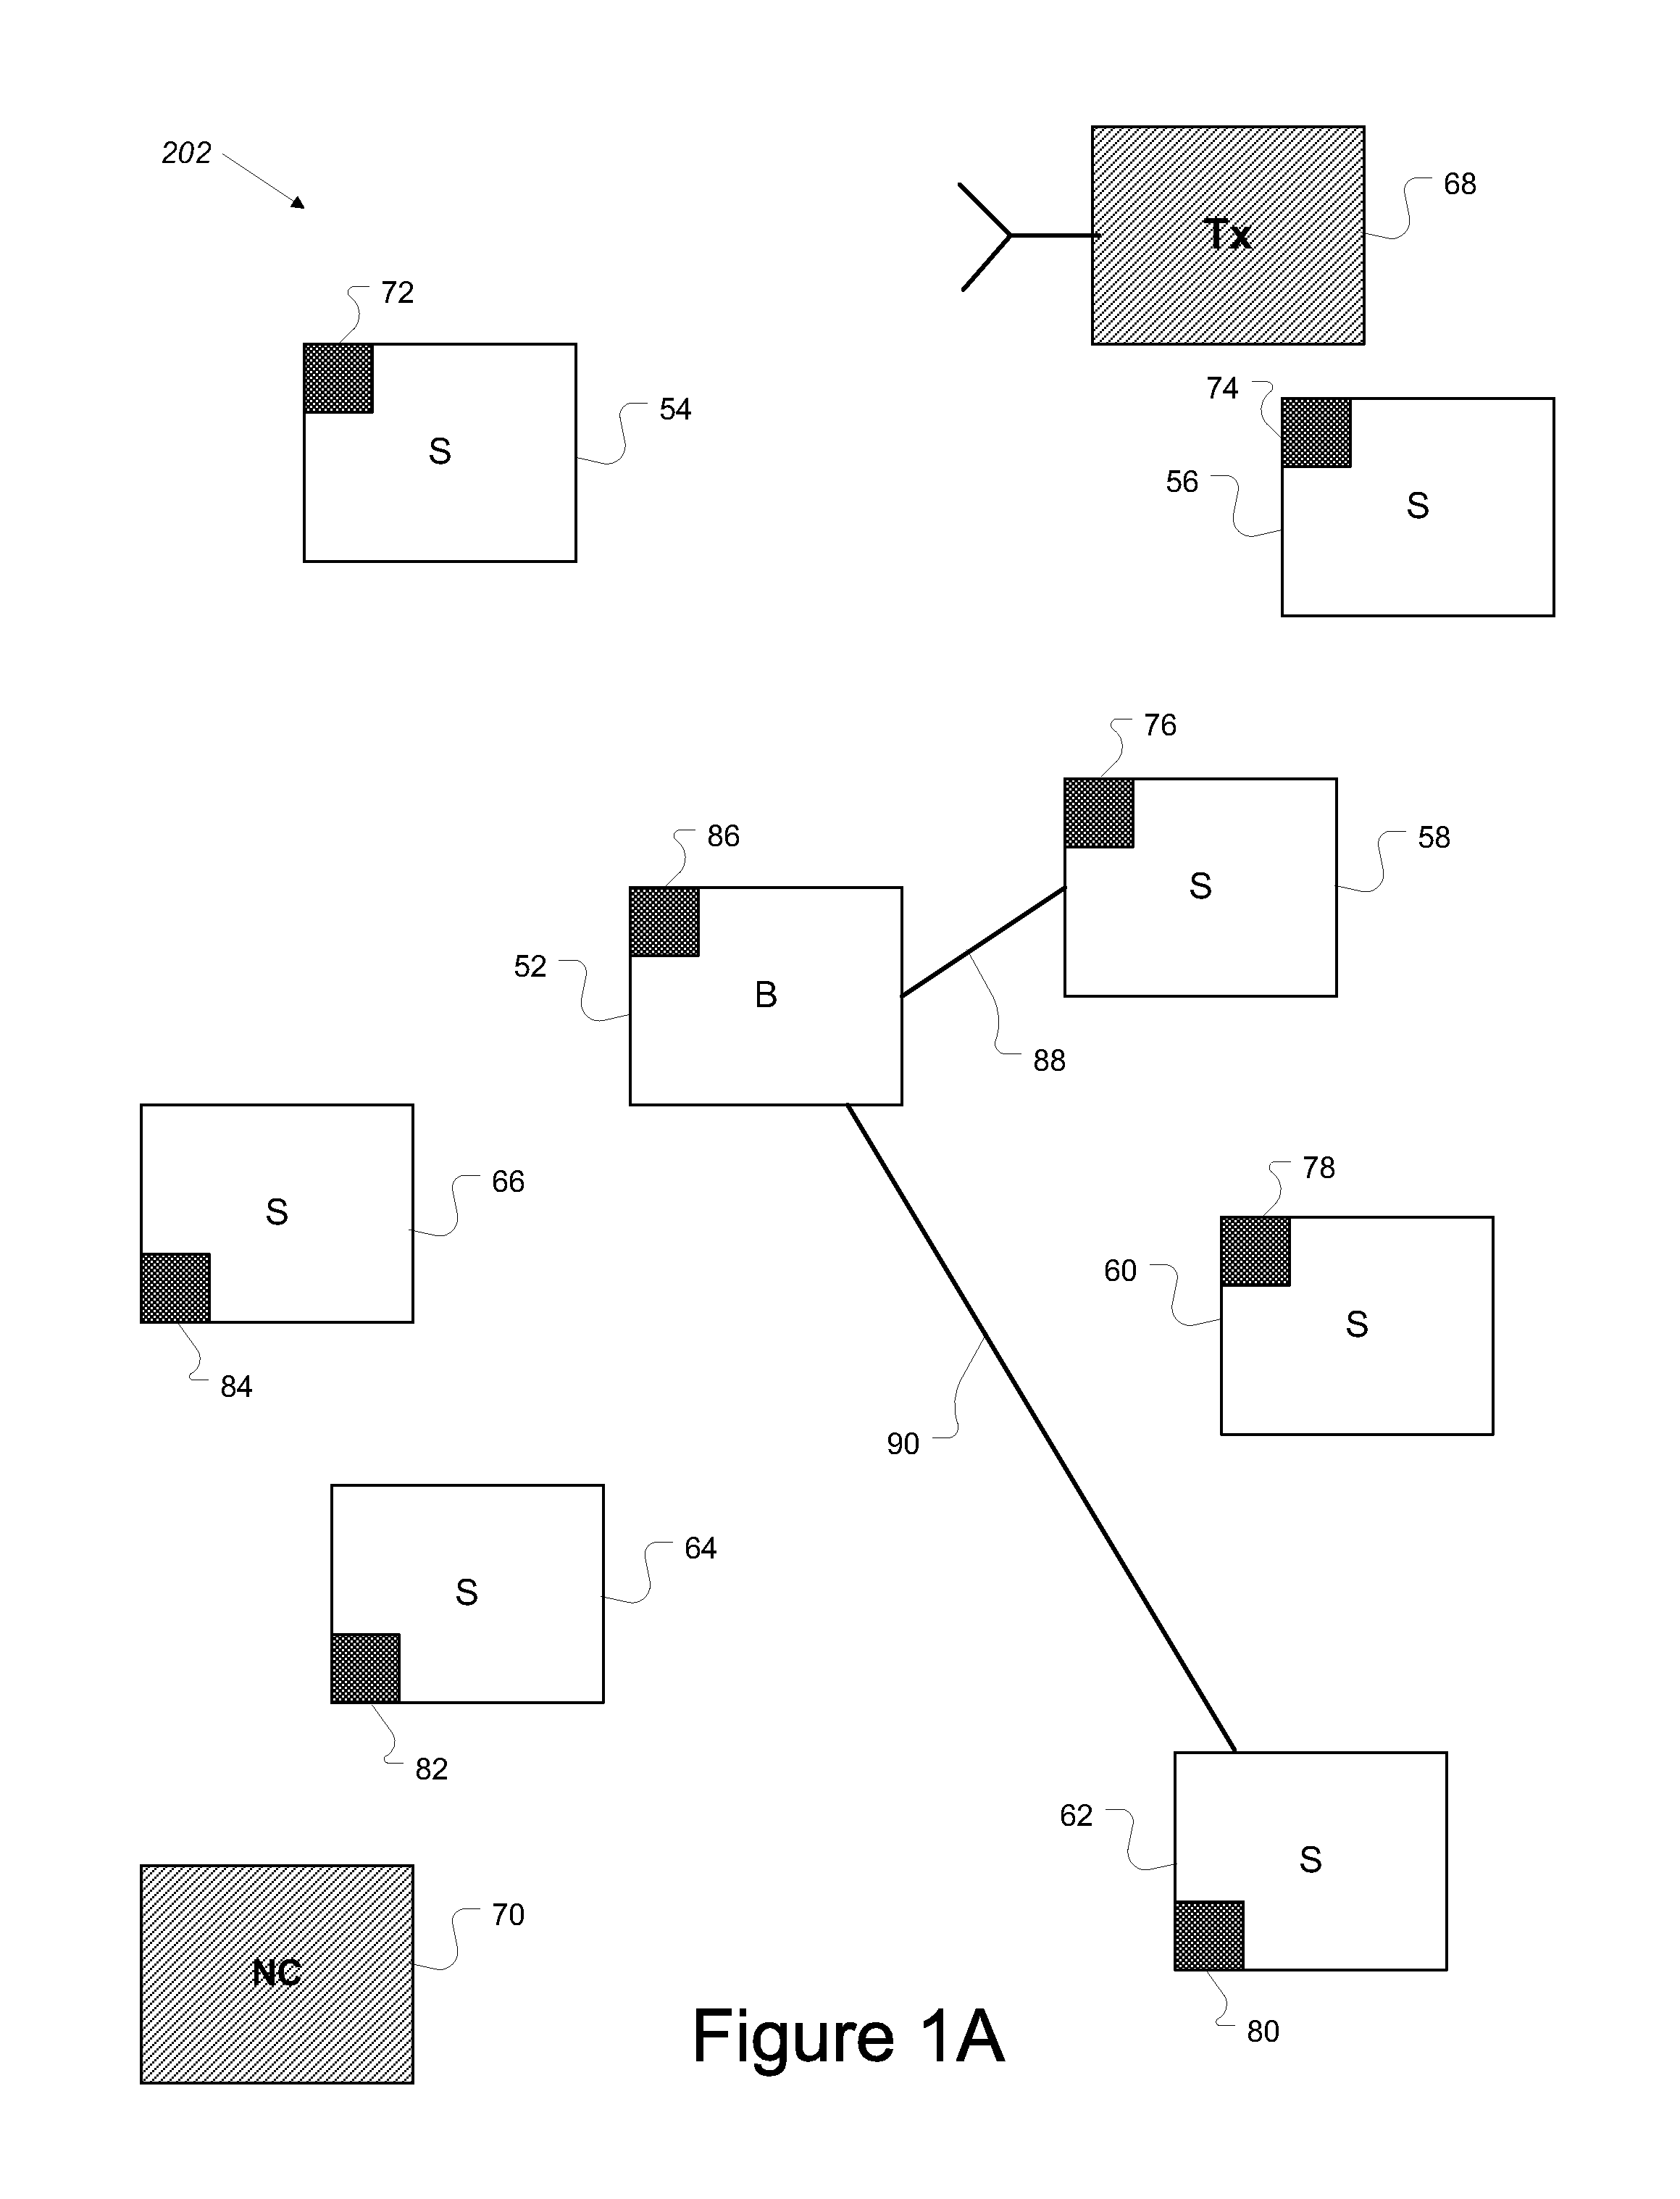 Methods for using a detector to monitor and detect channel occupancy